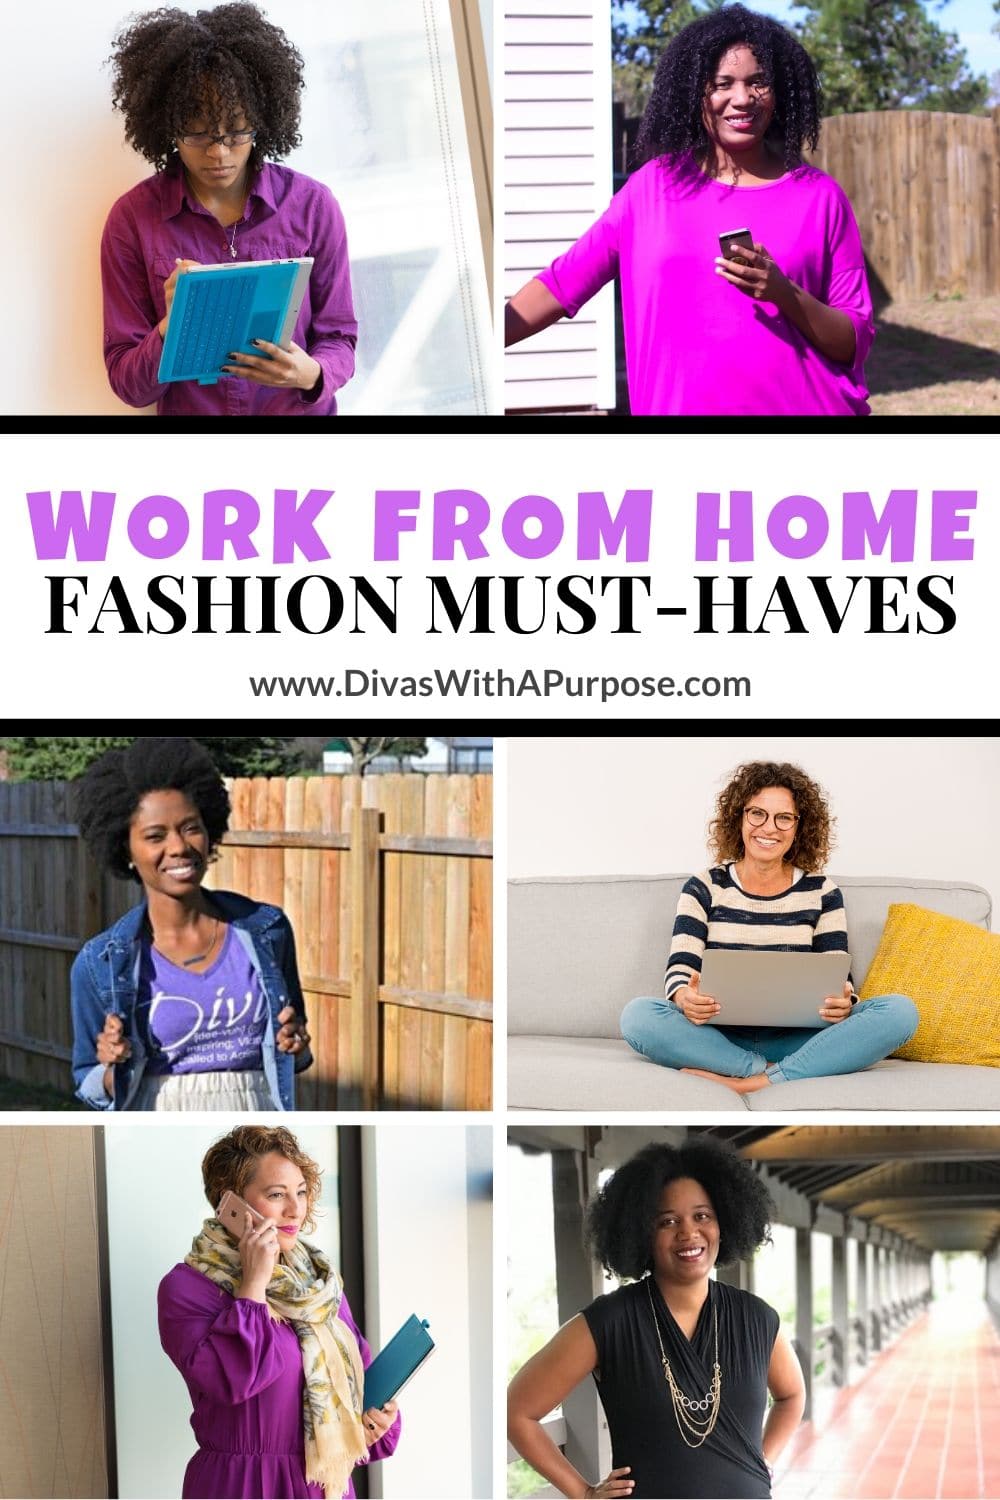 My Work From Home Fashion • Divas With A Purpose